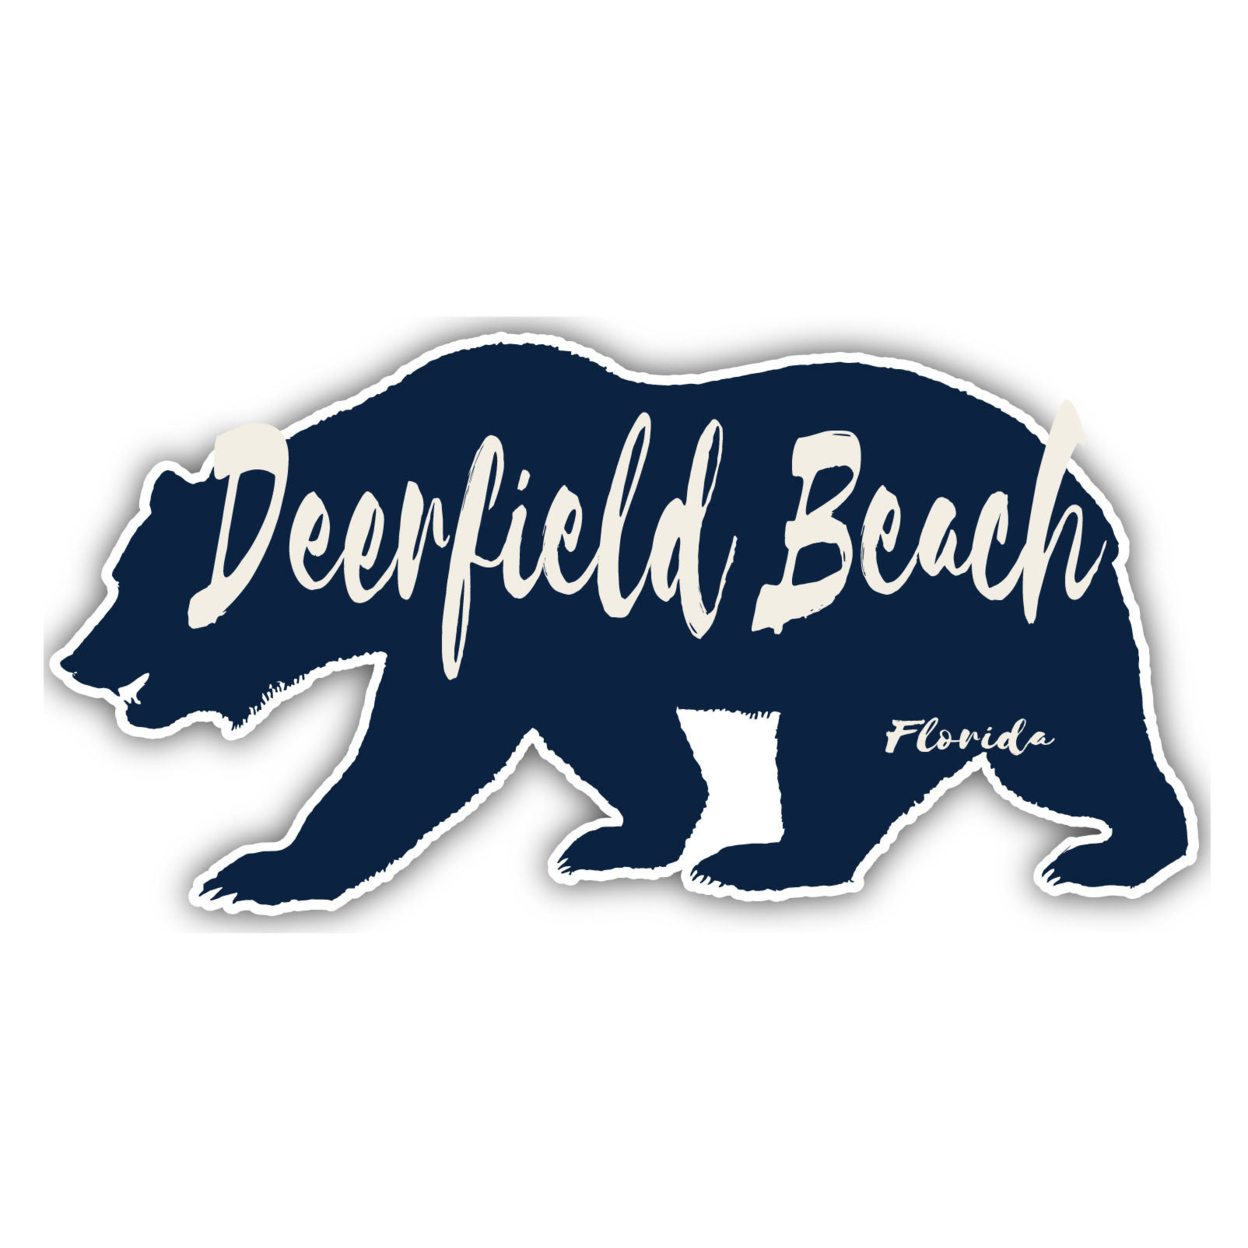 Deerfield Beach Florida Souvenir Decorative Stickers (Choose Theme And Size) - 4-Pack, 12-Inch, Great Outdoors